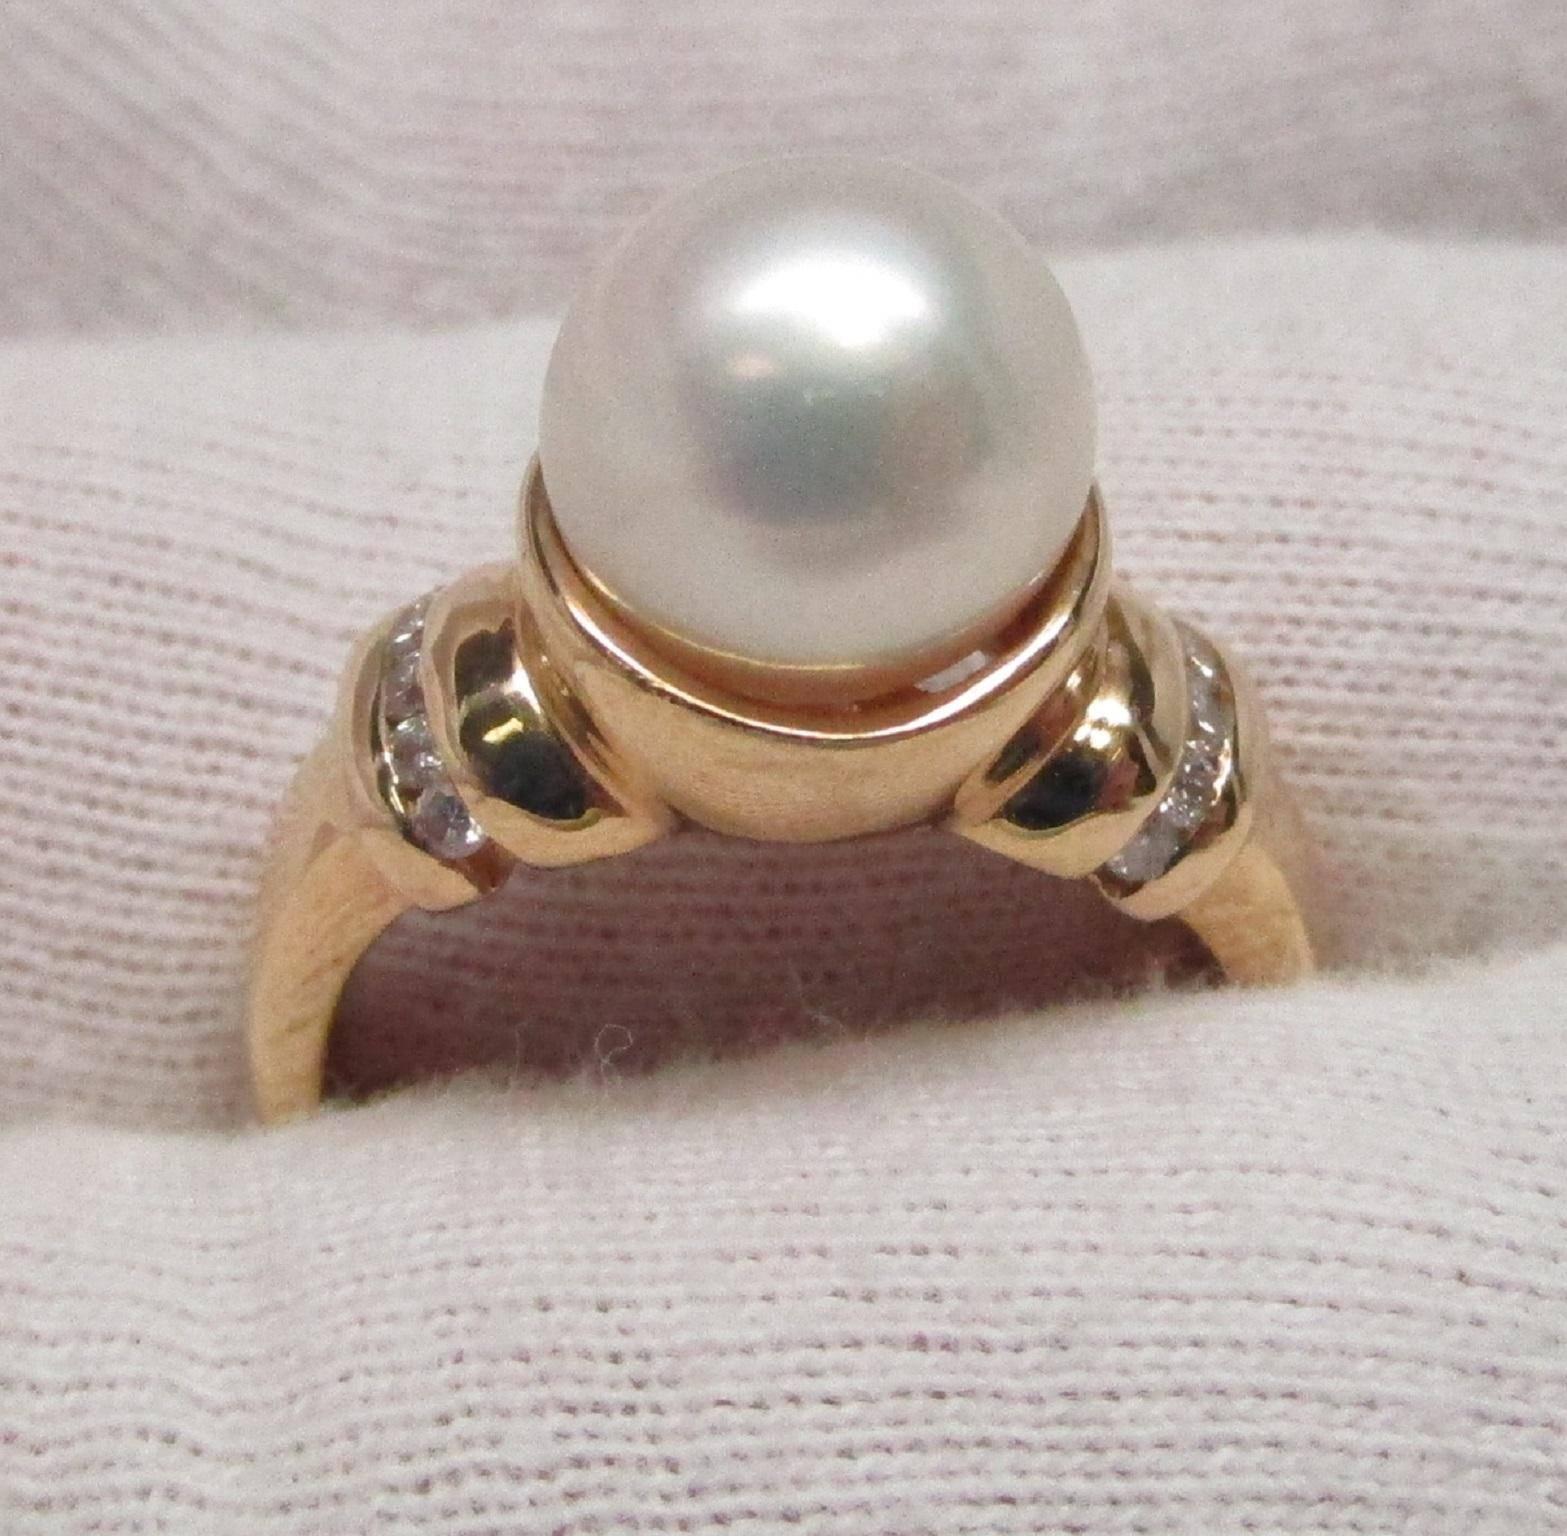 This is a strikingly beautiful cultured pearl set in 14K gold with 0.25ct total weight of diamonds. This ring could be the one that she says 